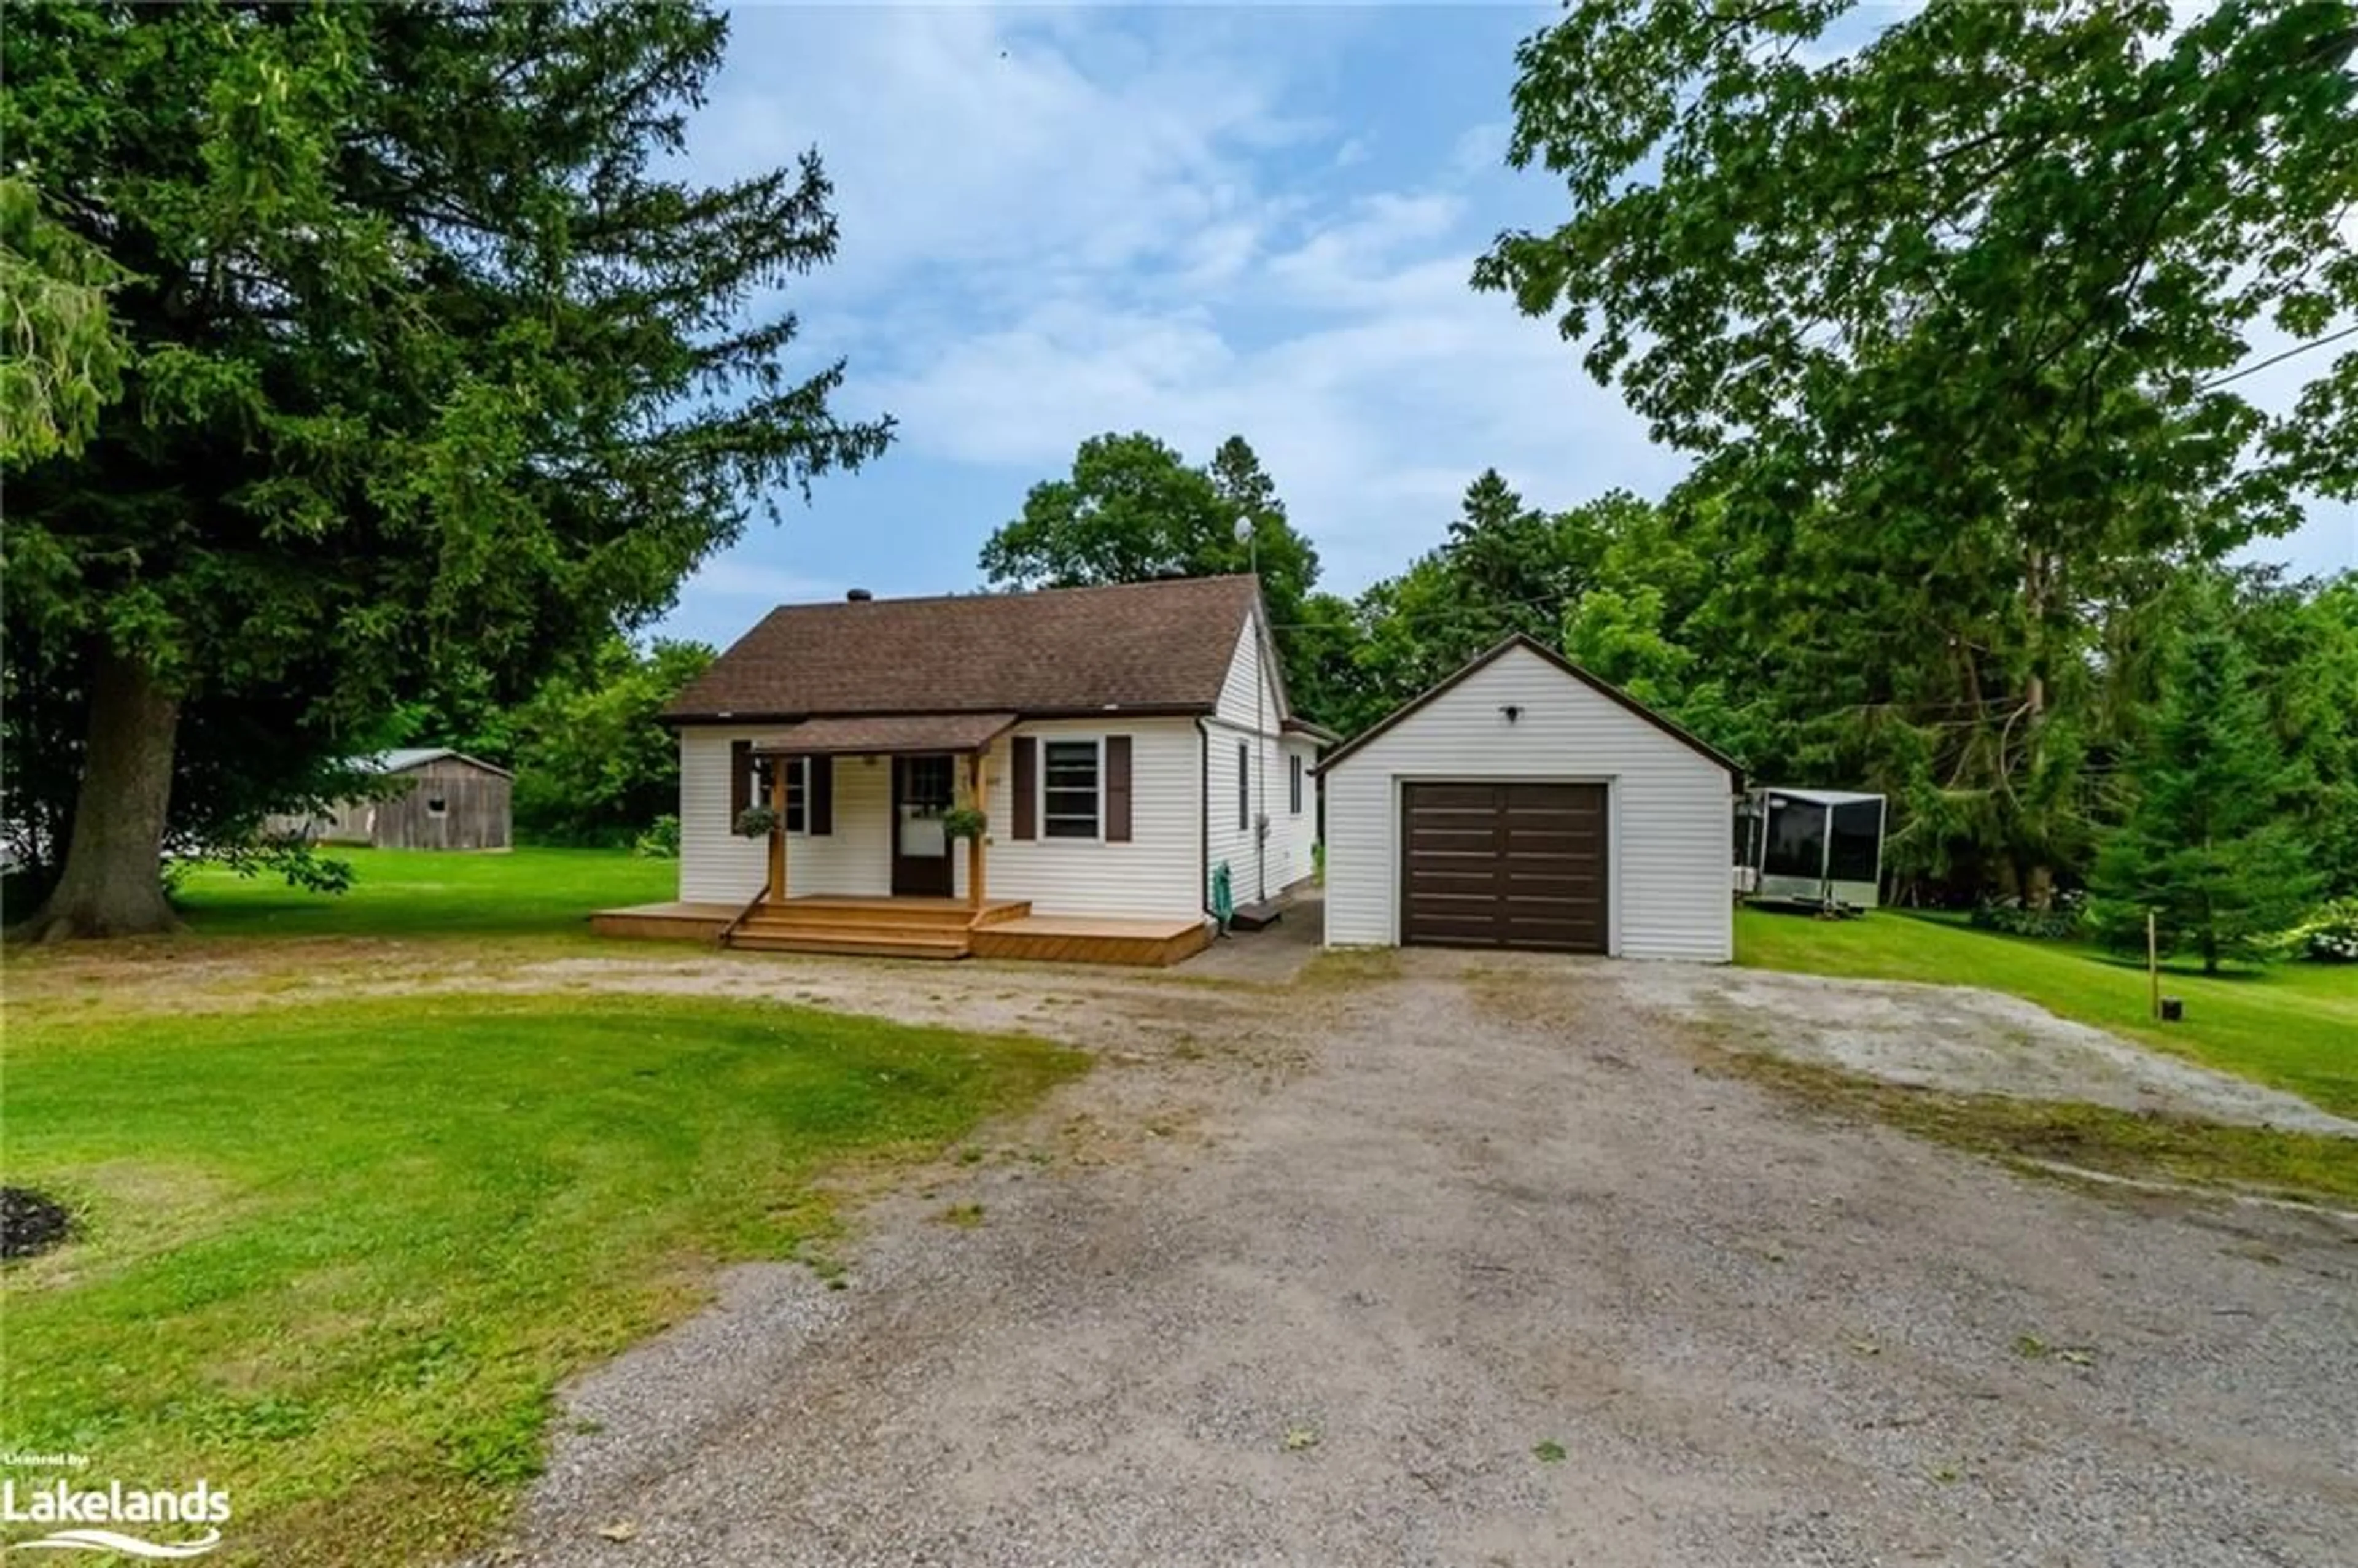 Cottage for 1217 Old Barrie Rd, Shanty Bay Ontario L0L 2L0